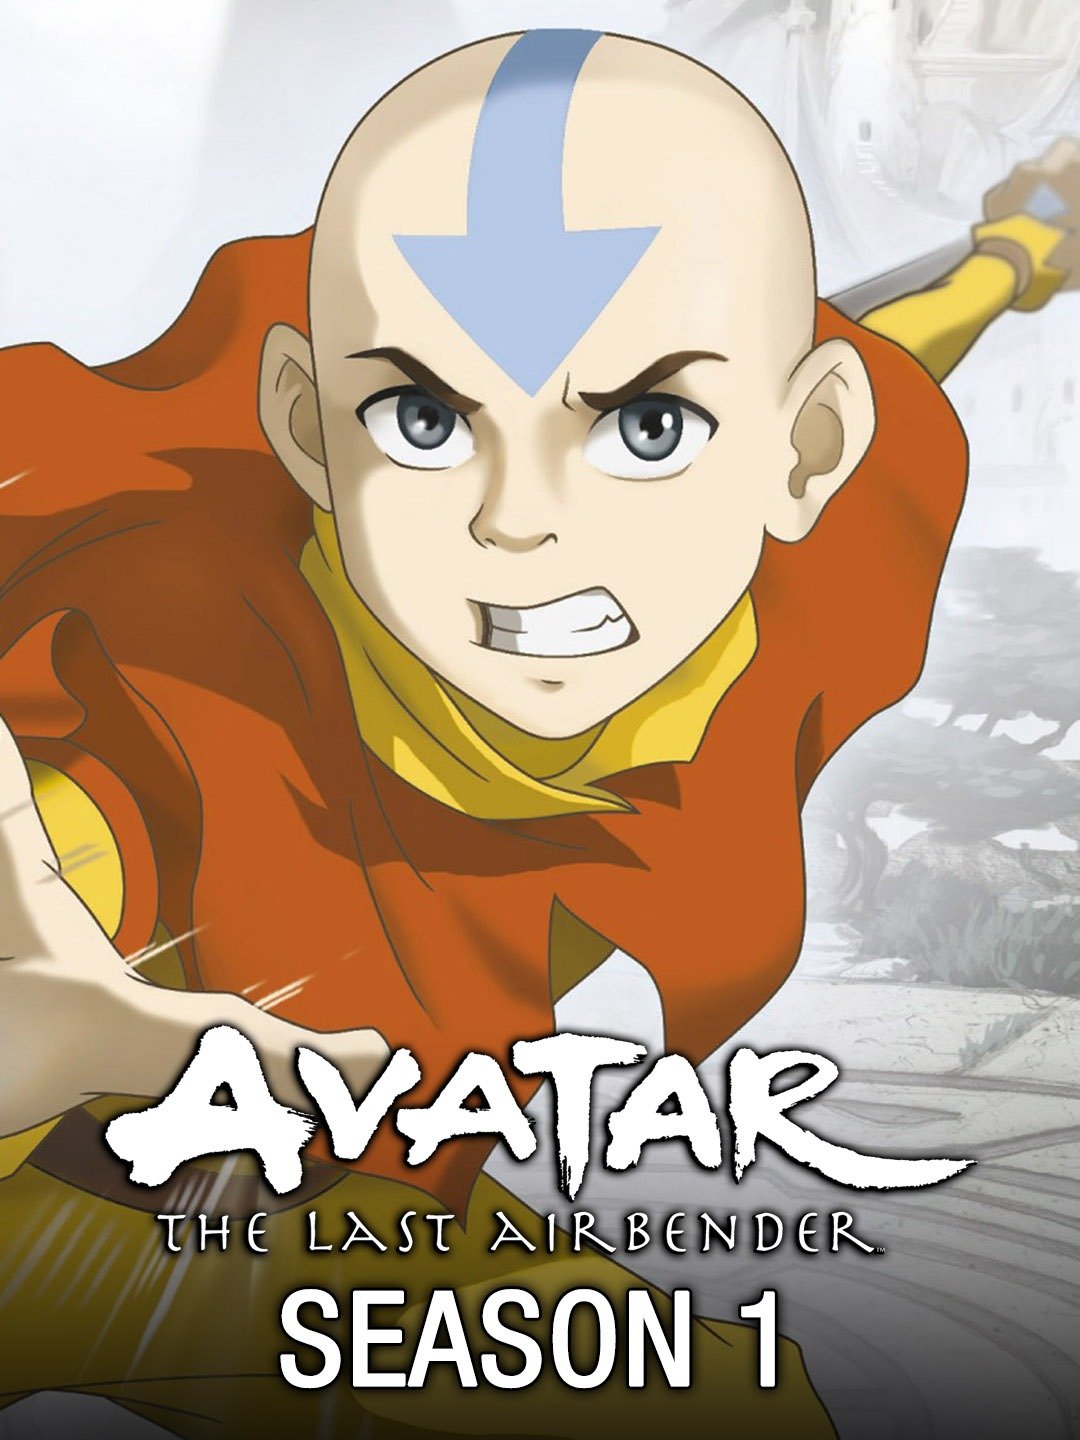 The 10 best episodes of Avatar the Last Airbender ranked